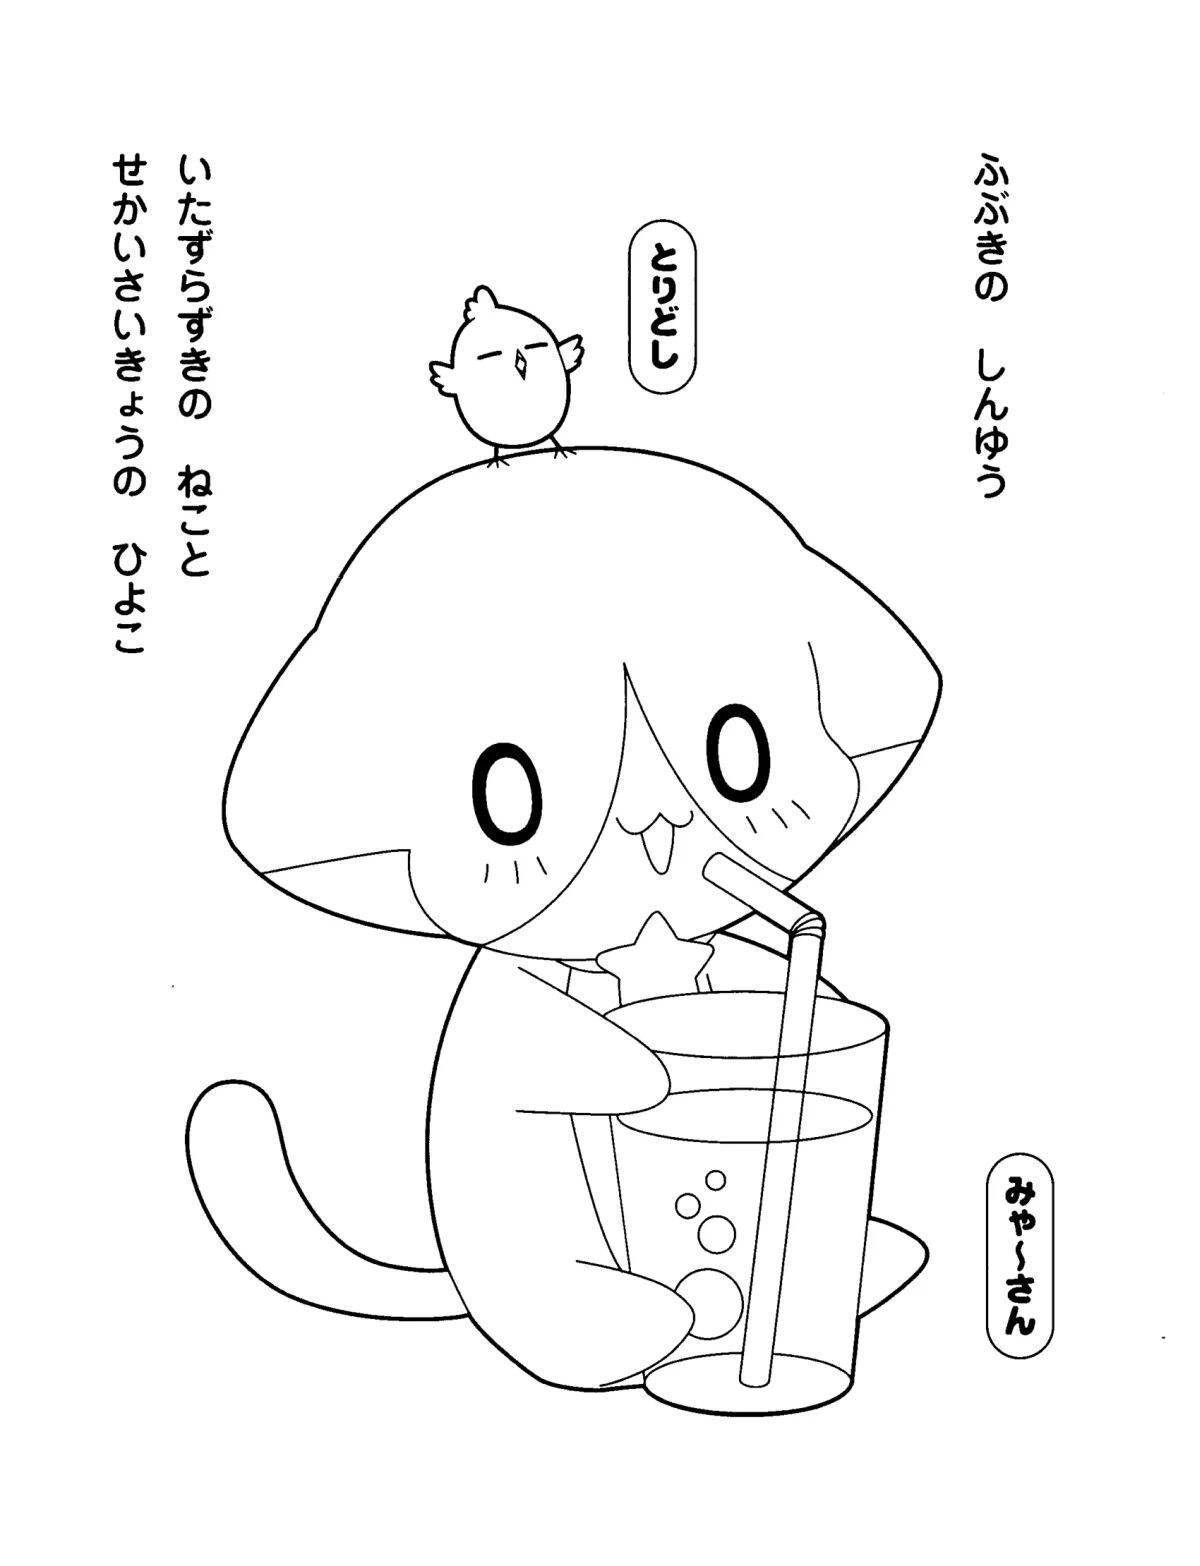 Silly kawaii cat coloring page